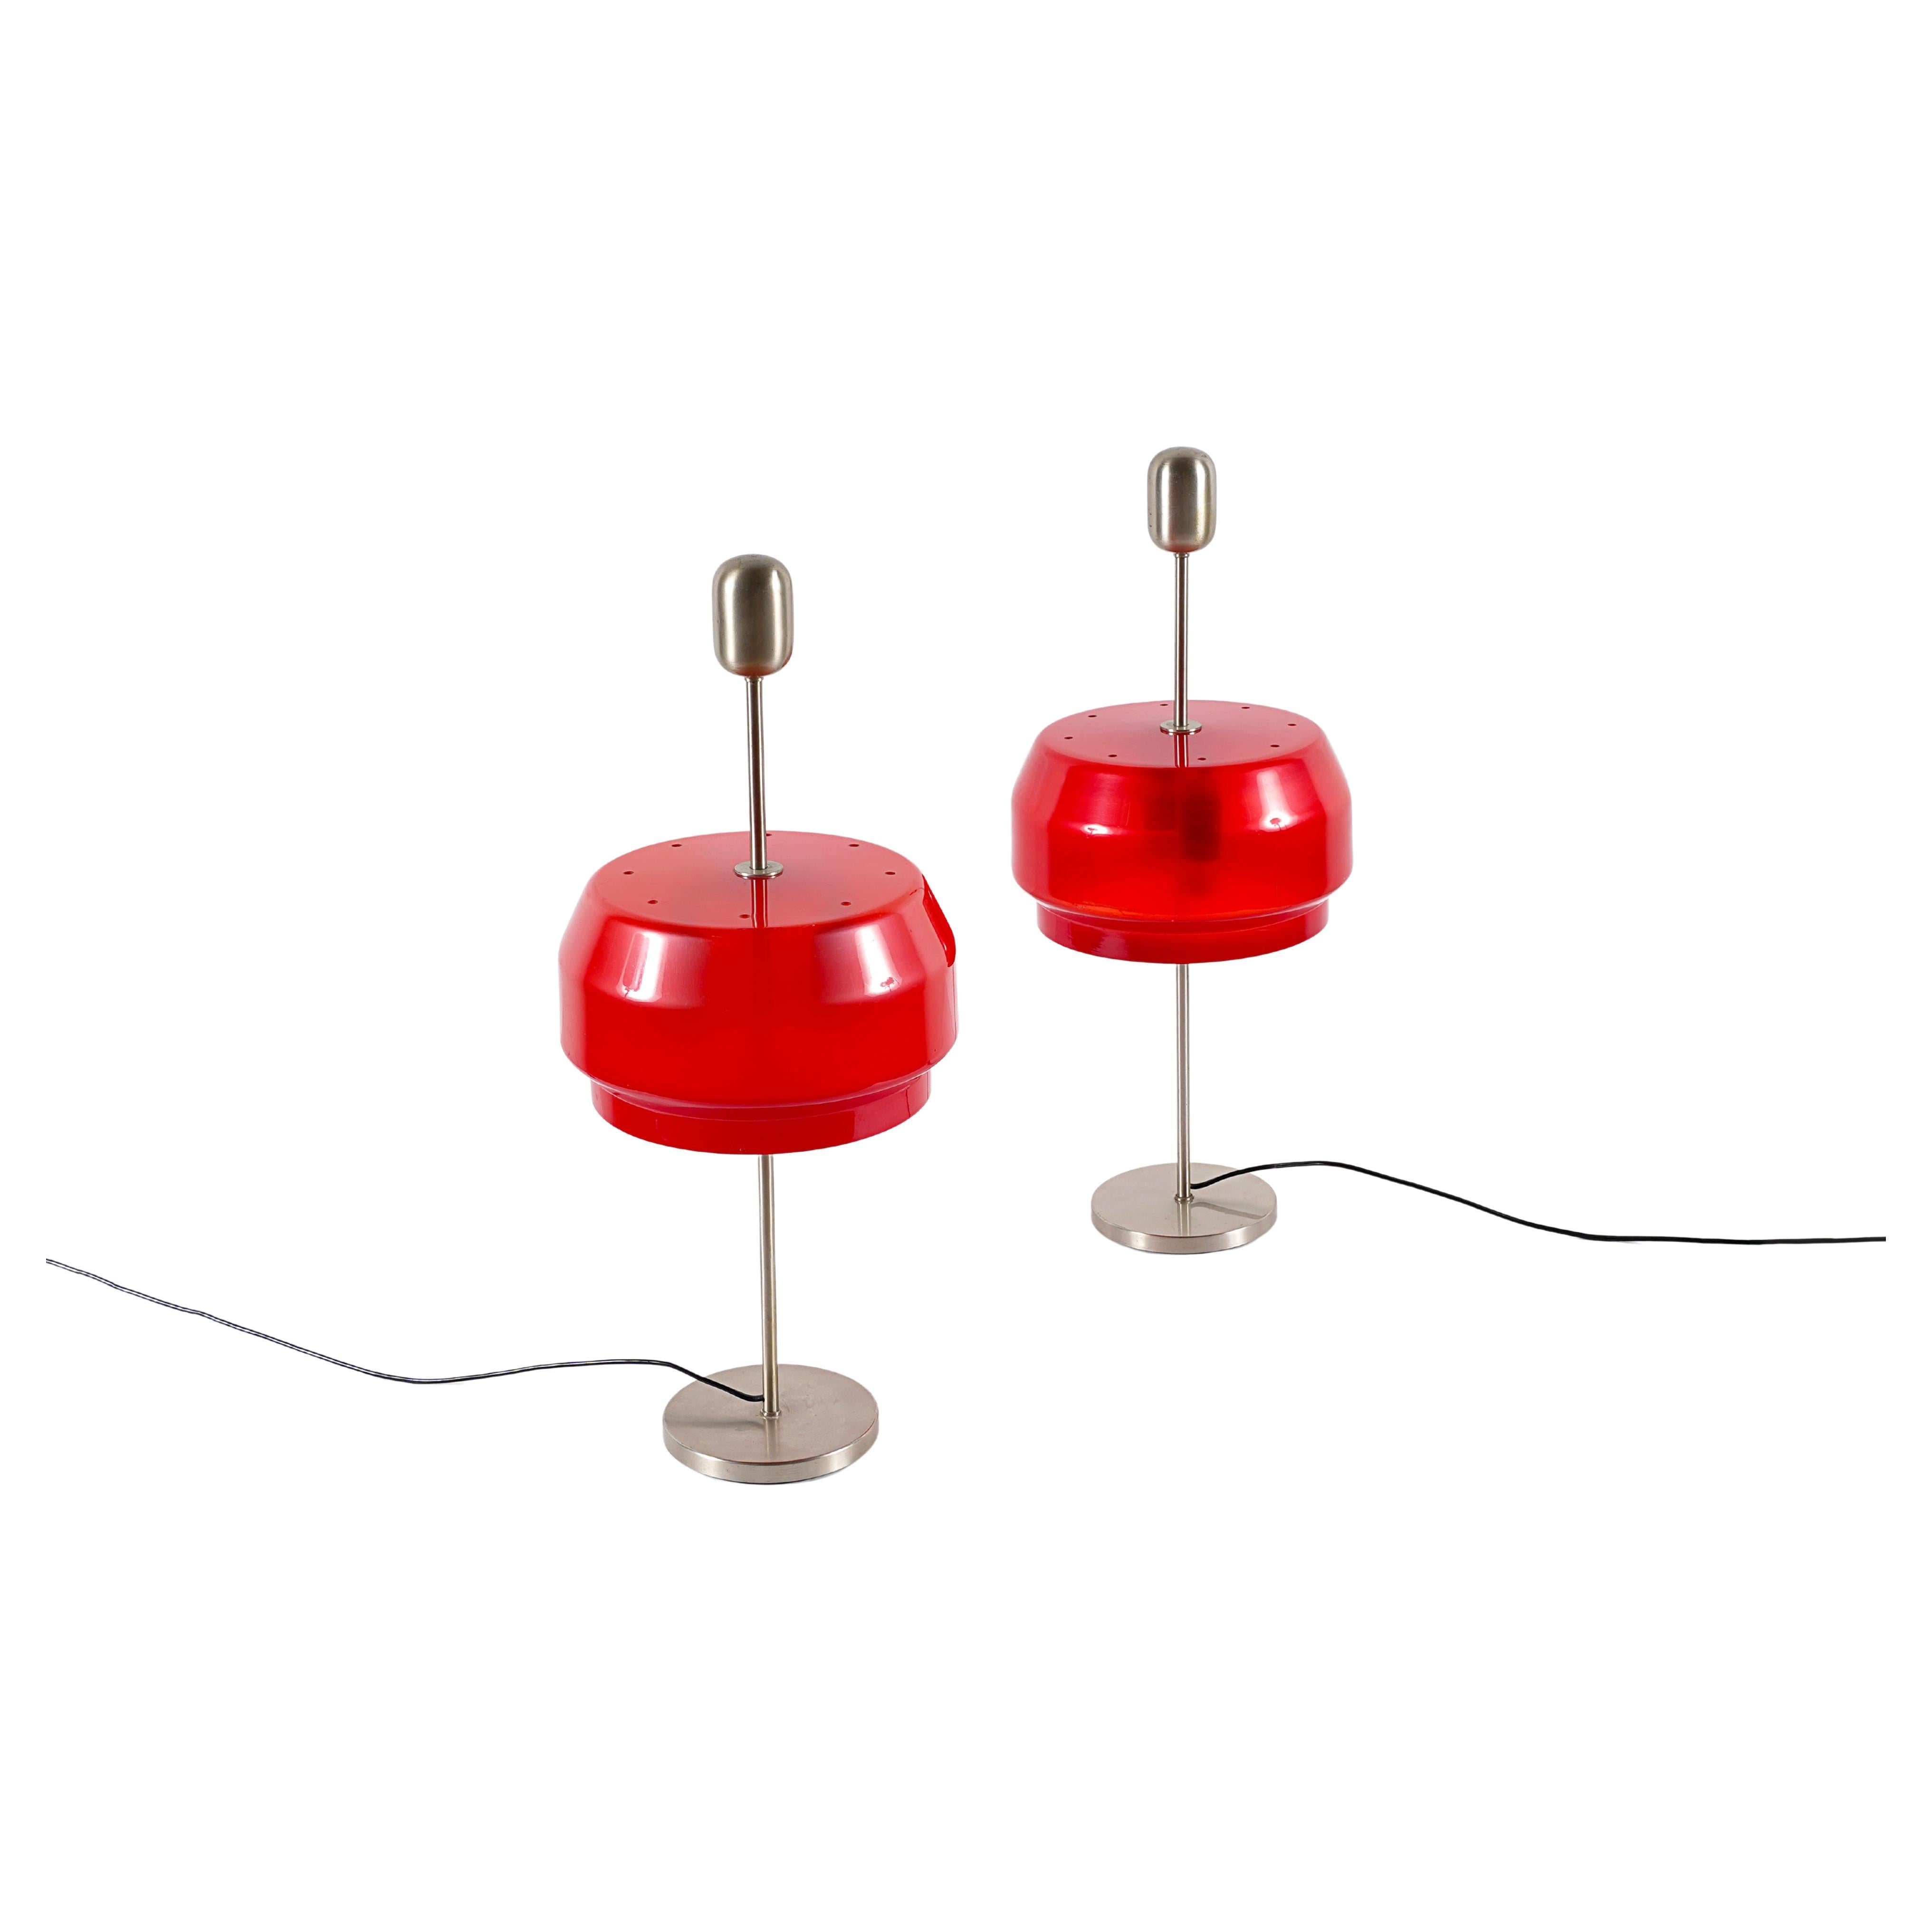 Studio GPA Monti - KARTELL 1959 - Pair of lamps KD 9 by G. Piero and Anna Monti For Sale